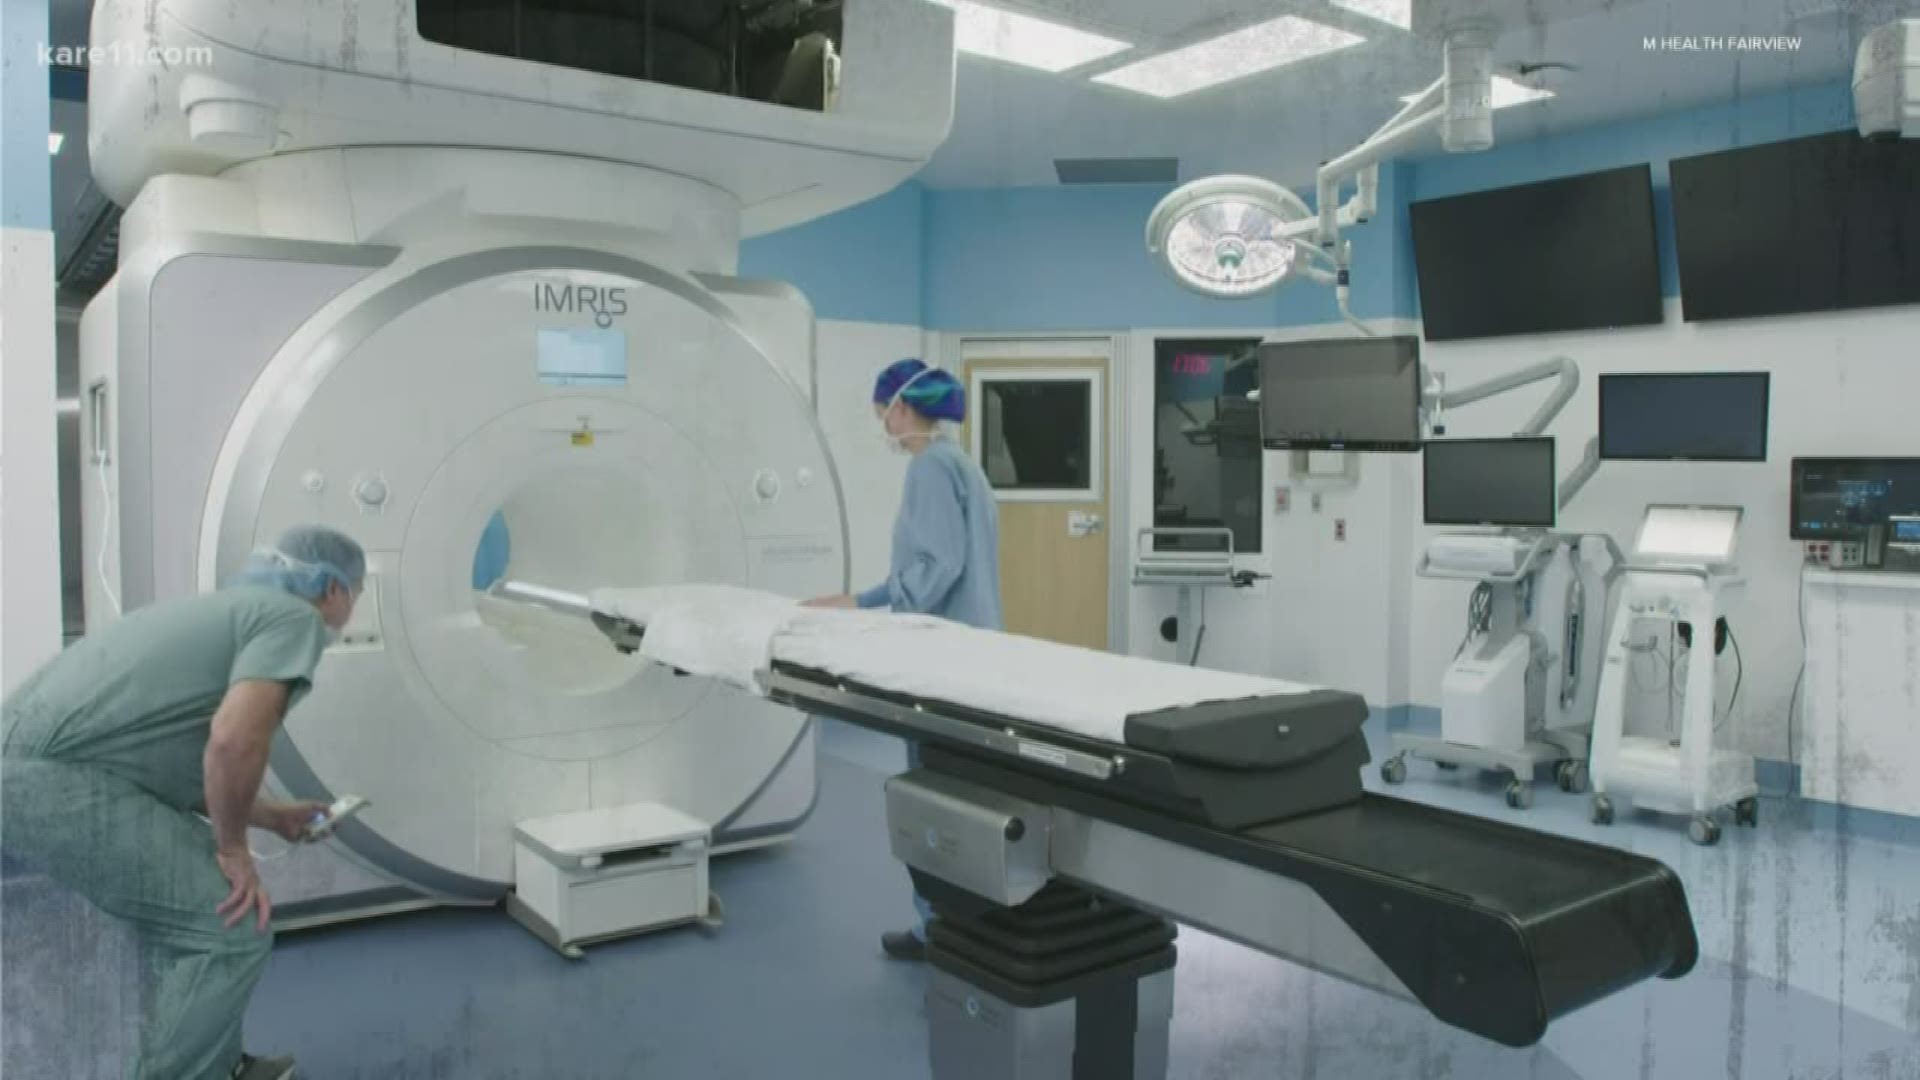 The advanced neurosurgical operating area features a first-in-the-world design that allows an MRI machine to enter and exit three operating rooms during surgery.